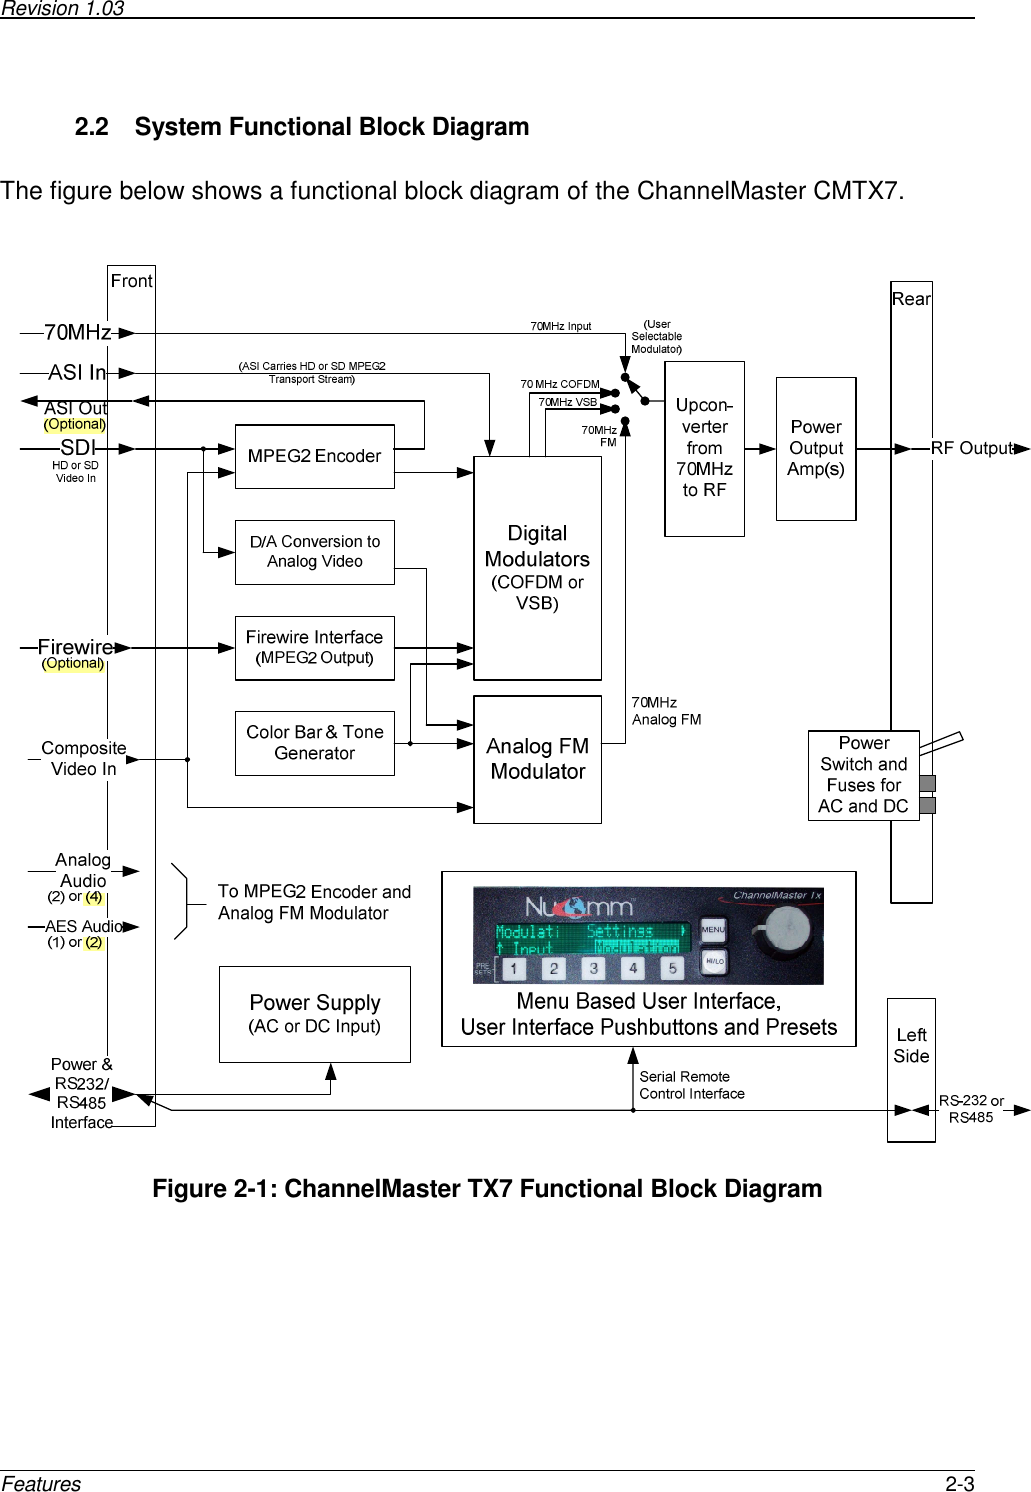 Revision 1.03      Features  2-3  2.2  System Functional Block Diagram  The figure below shows a functional block diagram of the ChannelMaster CMTX7.    Figure 2-1: ChannelMaster TX7 Functional Block Diagram  